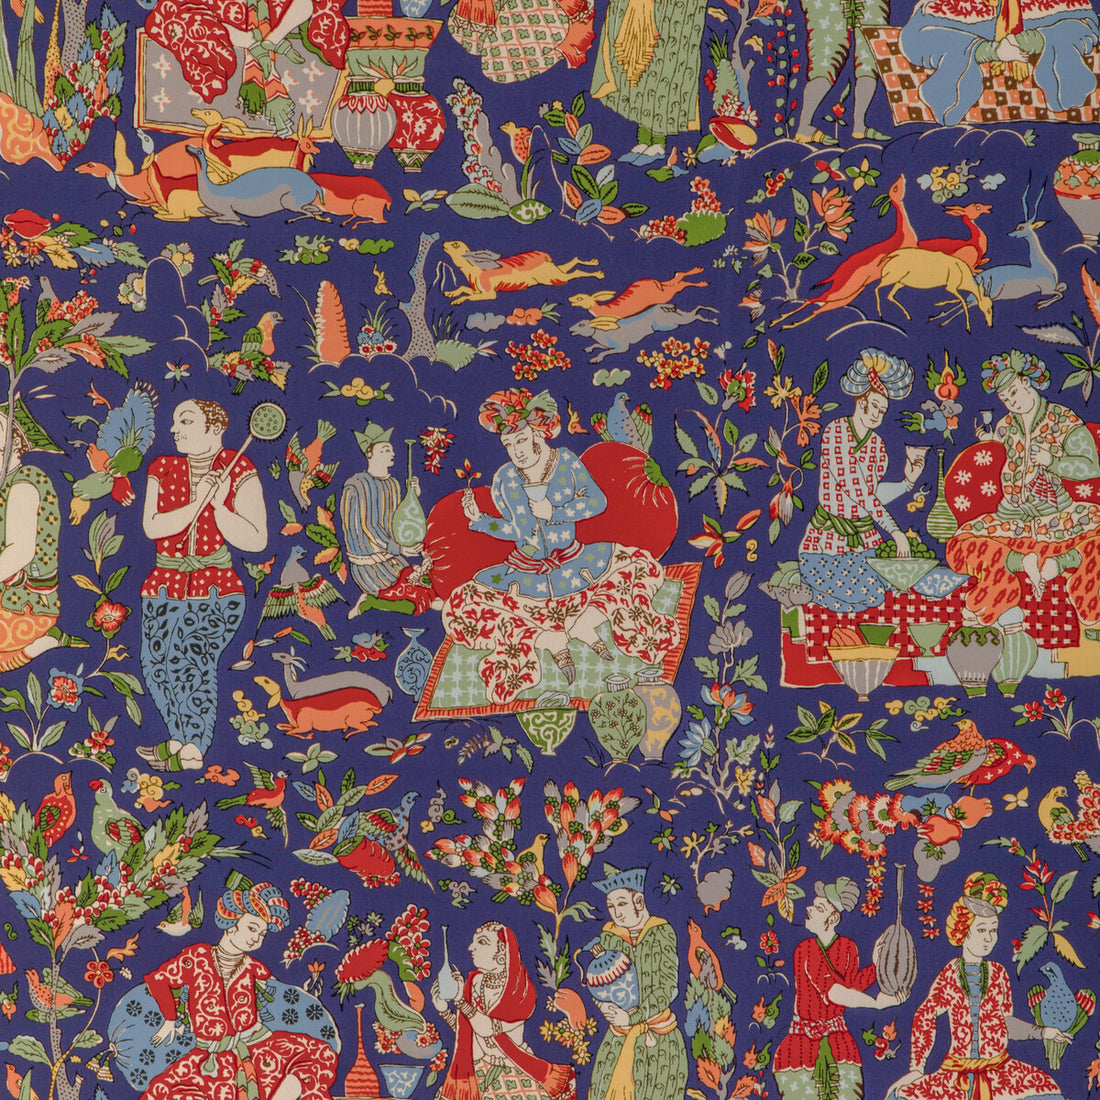 Shalimar Print fabric in navy/red color - pattern 8024100.519.0 - by Brunschwig &amp; Fils in the La Menagerie collection